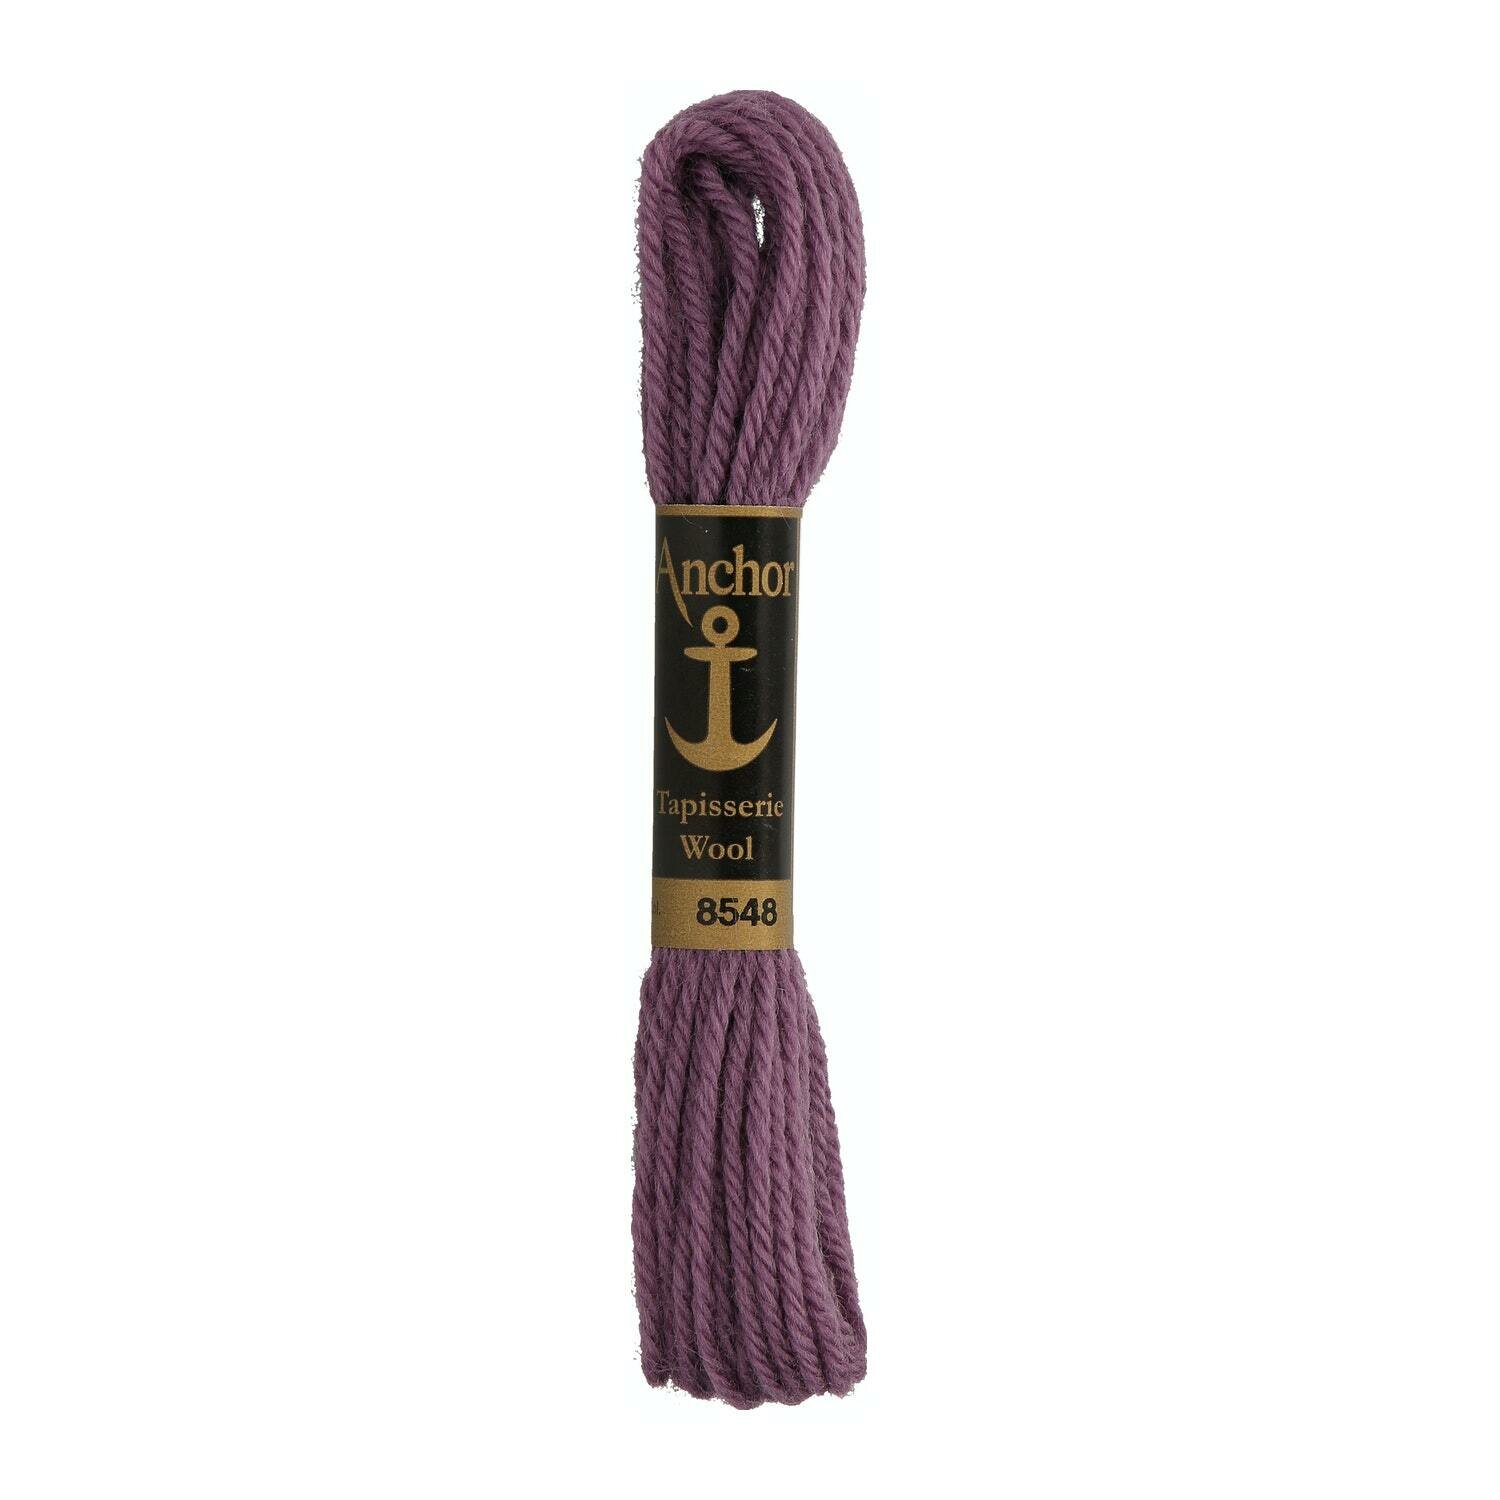 Anchor Tapisserie Wool #  08548